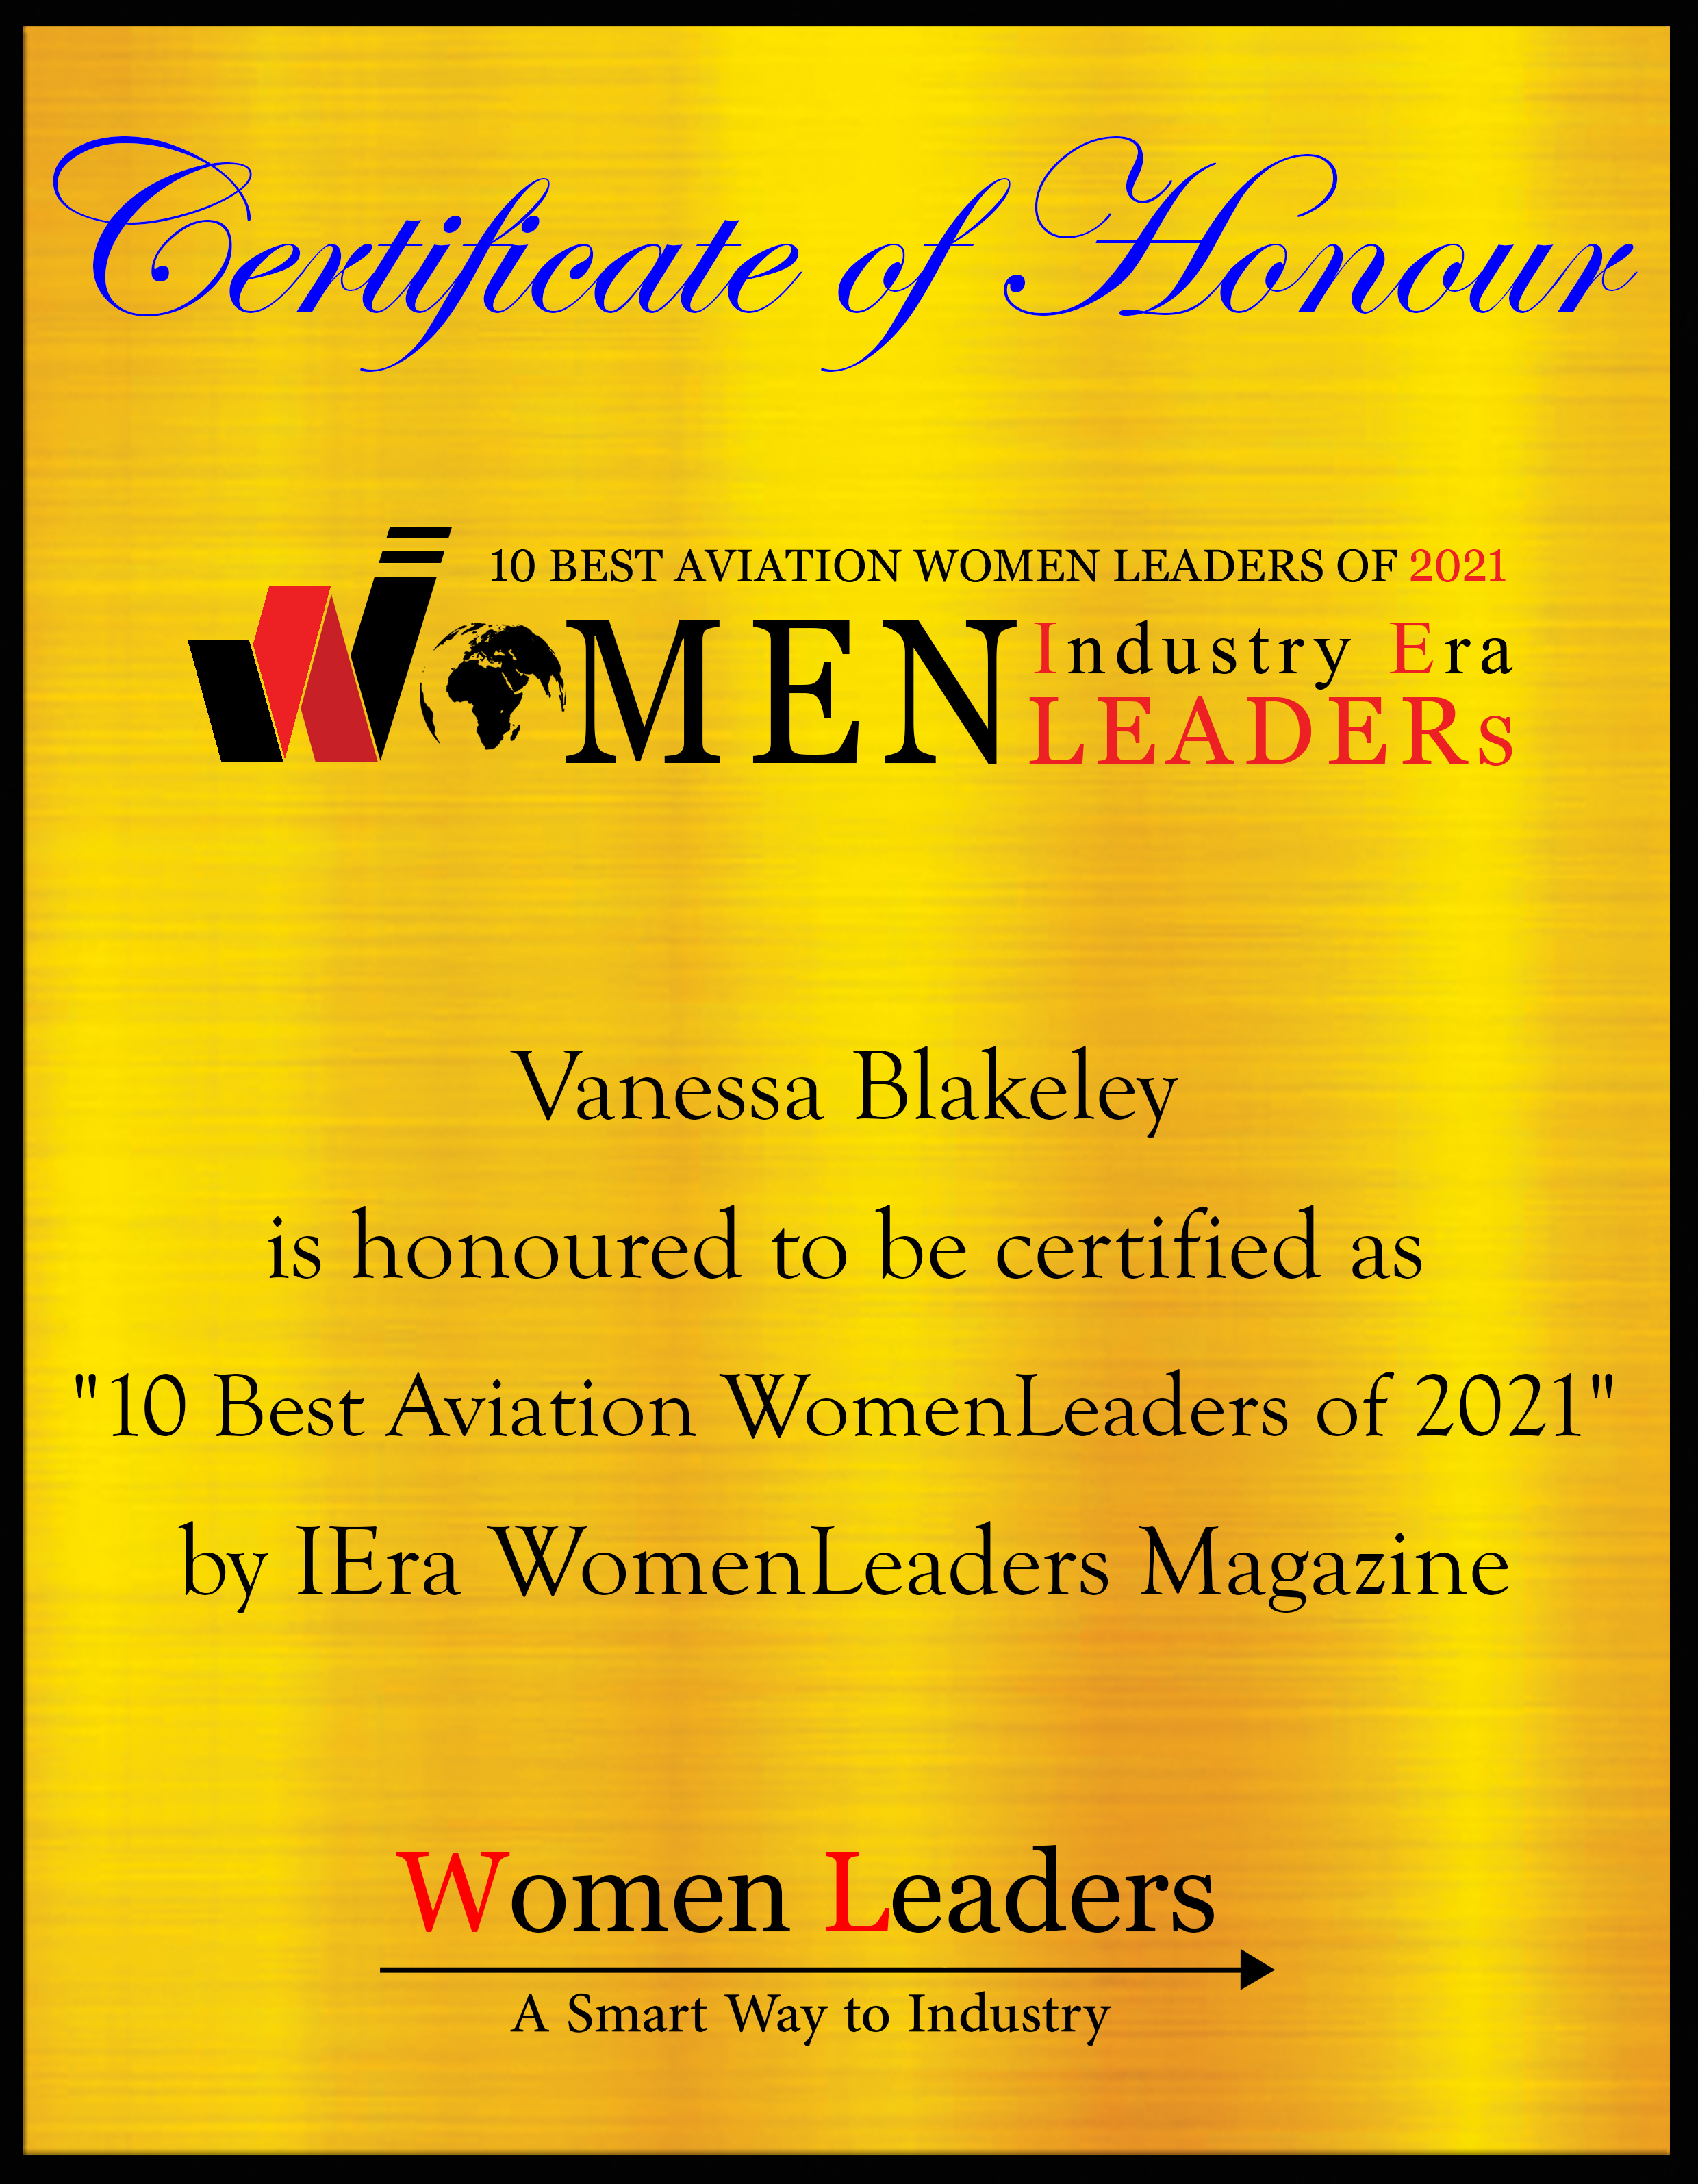 Vanessa Blakeley, Director of Operations at Ascent AeroSystems, Most Aviation WomenLeaders of 2021